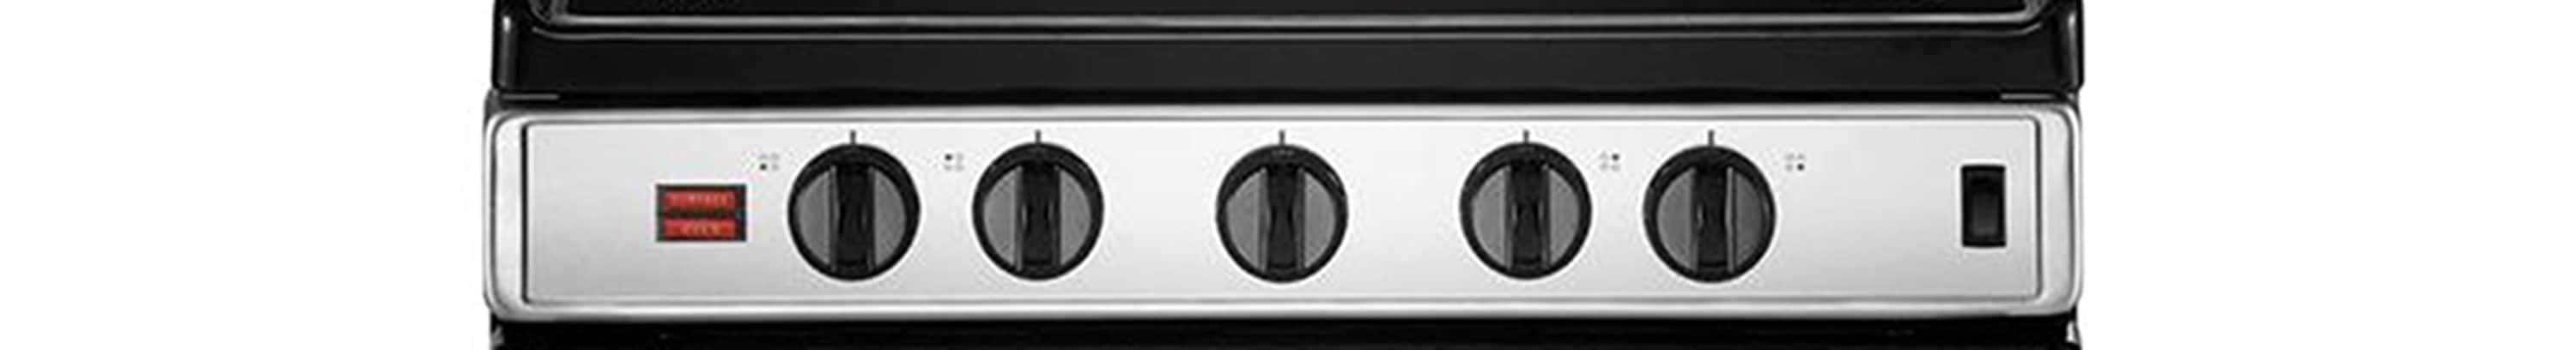 WFE500M4HSWhirlpool 24-inch Freestanding Electric Range with